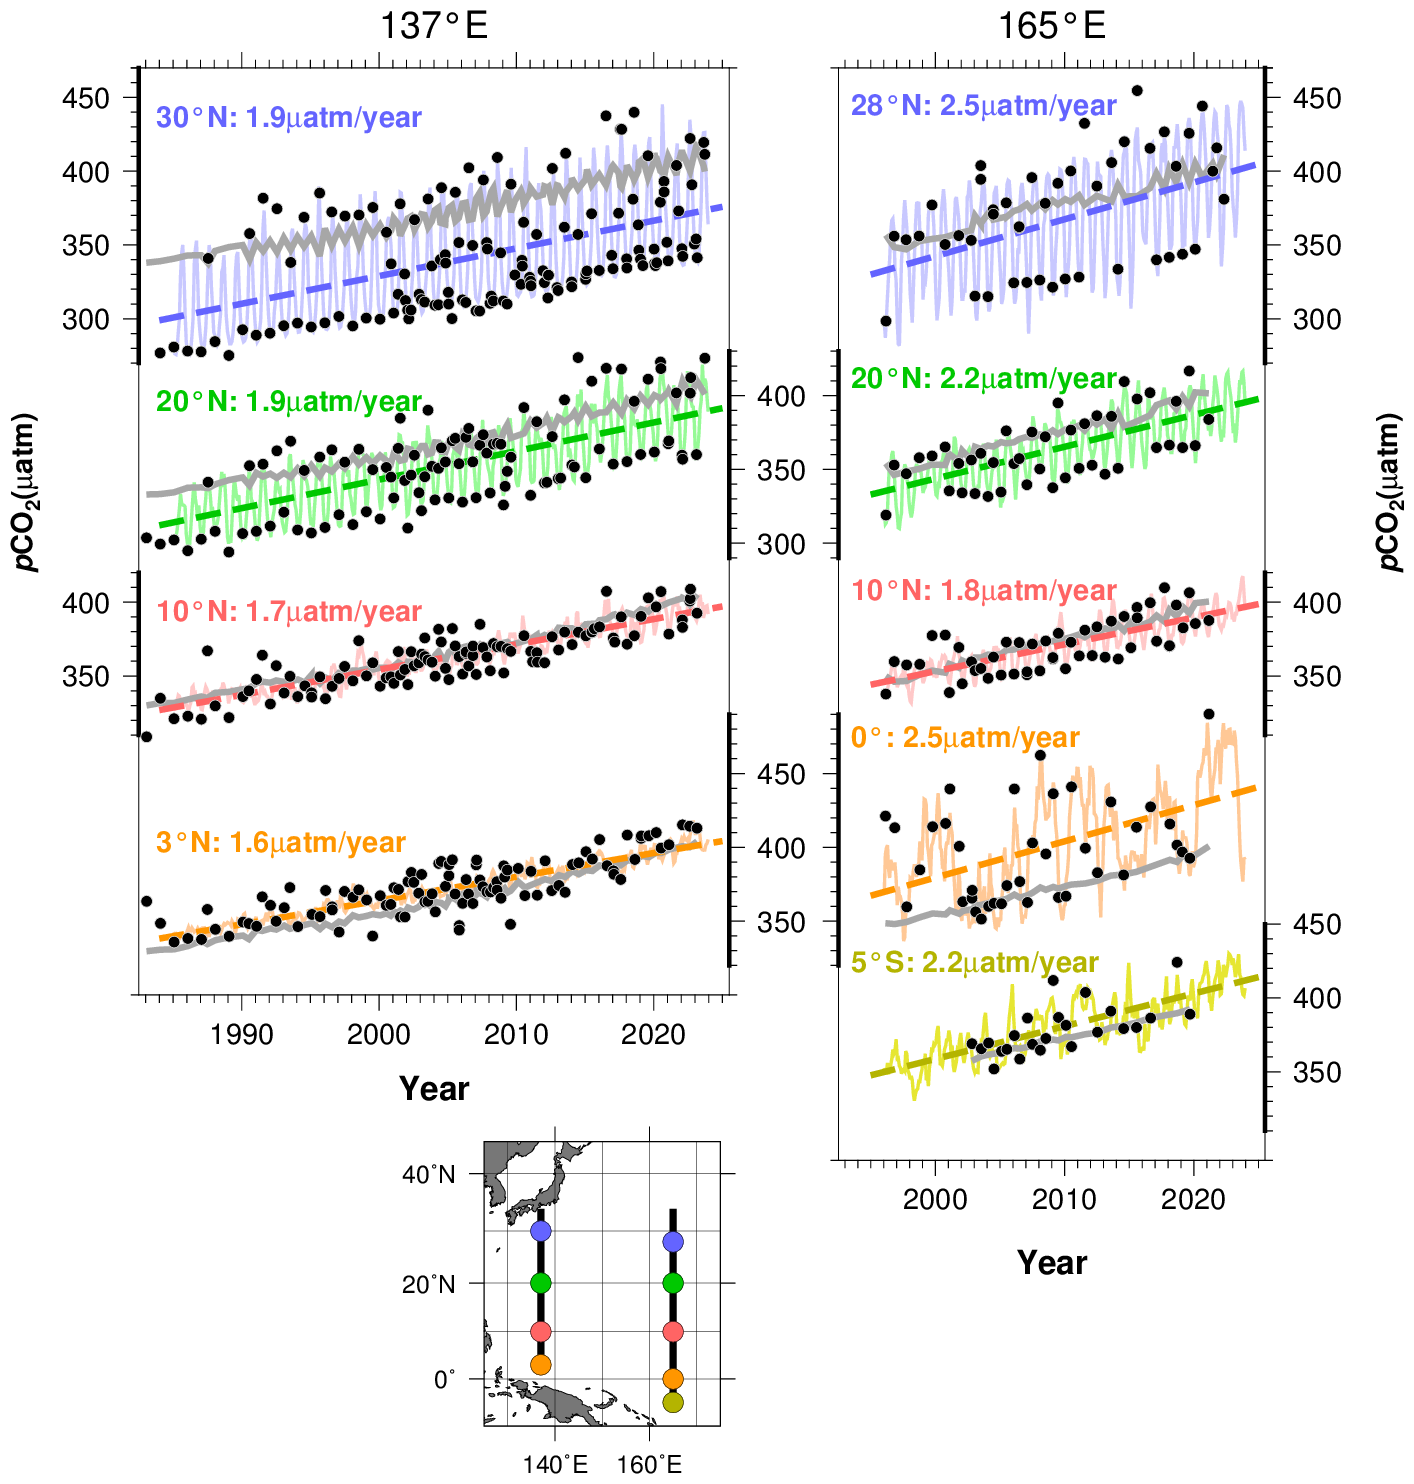 Annual changes in oceanic and atmospheric CO2 concentrations